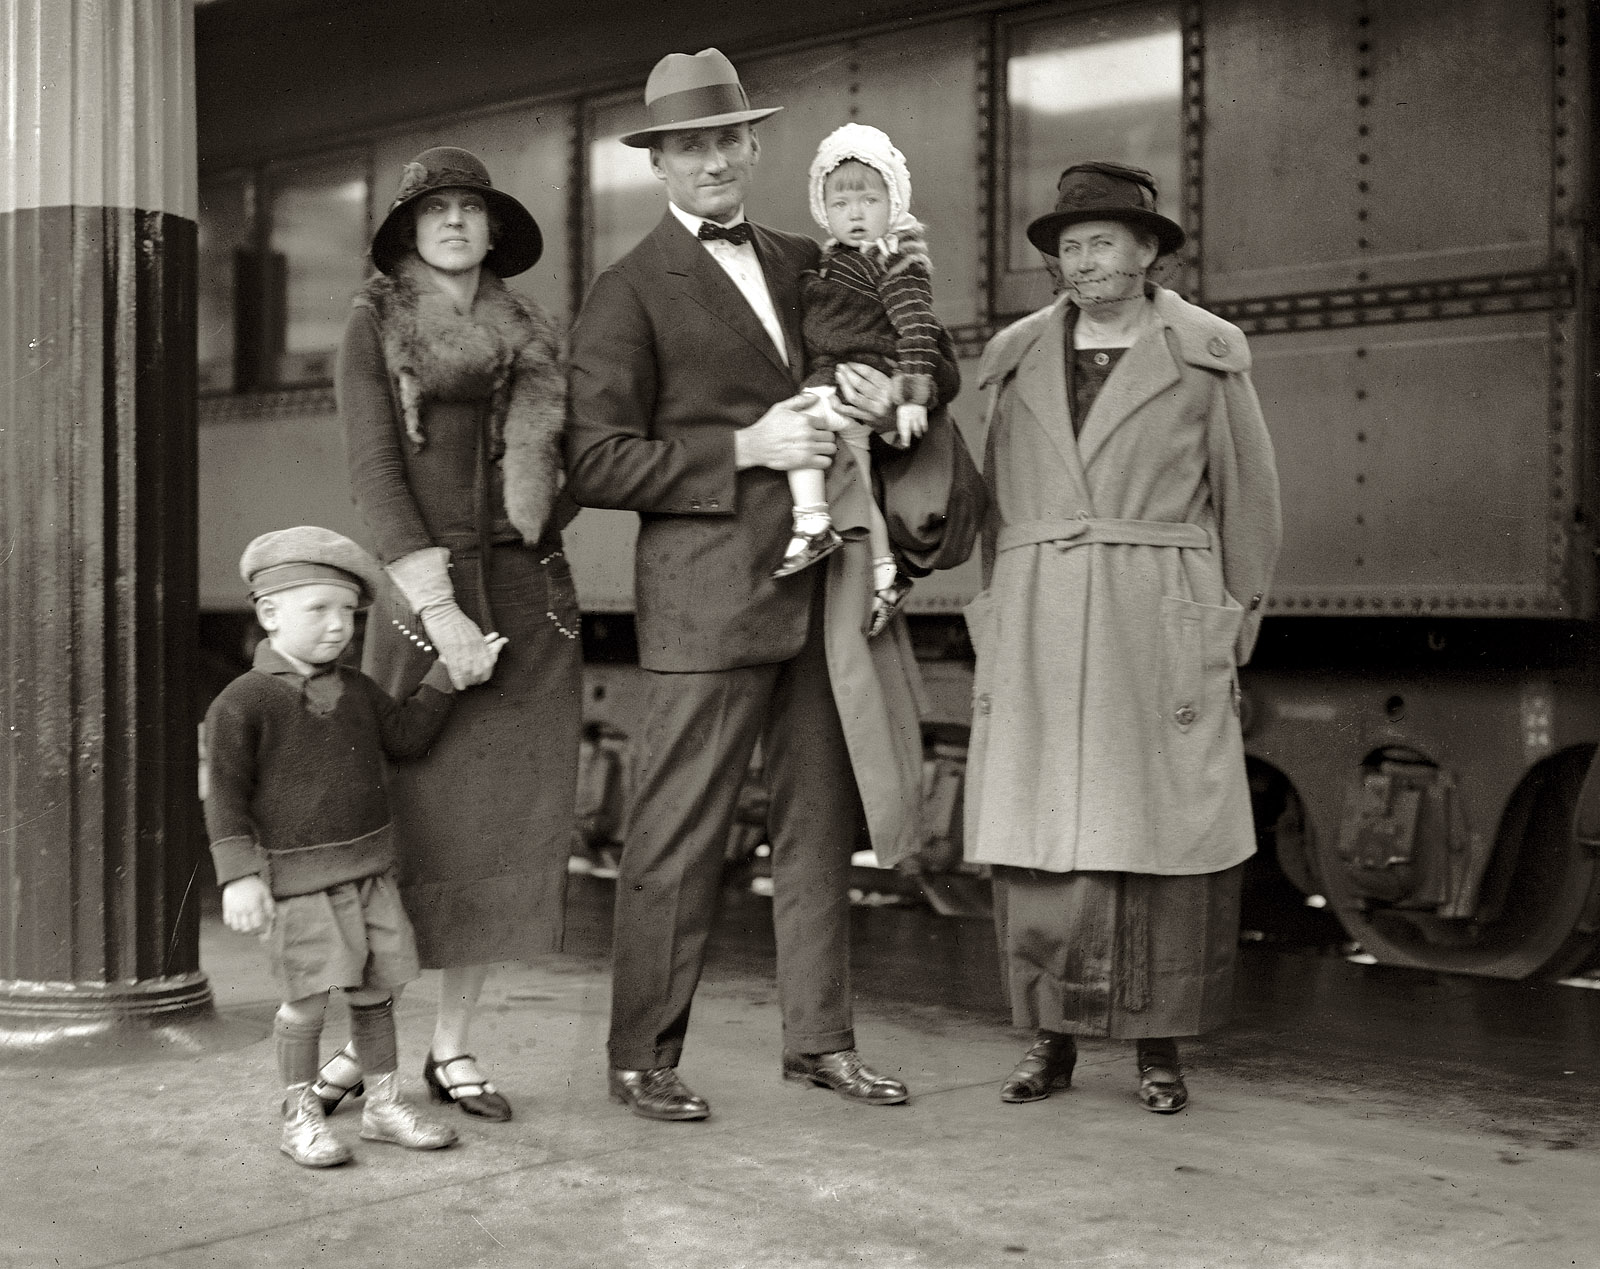 September 30, 1924. Washington Nationals pitcher Walter Johnson, aka "The Big Train," with his wife, mother and children at Union Station. View full size. National Photo Company collection glass negative, Library of Congress.